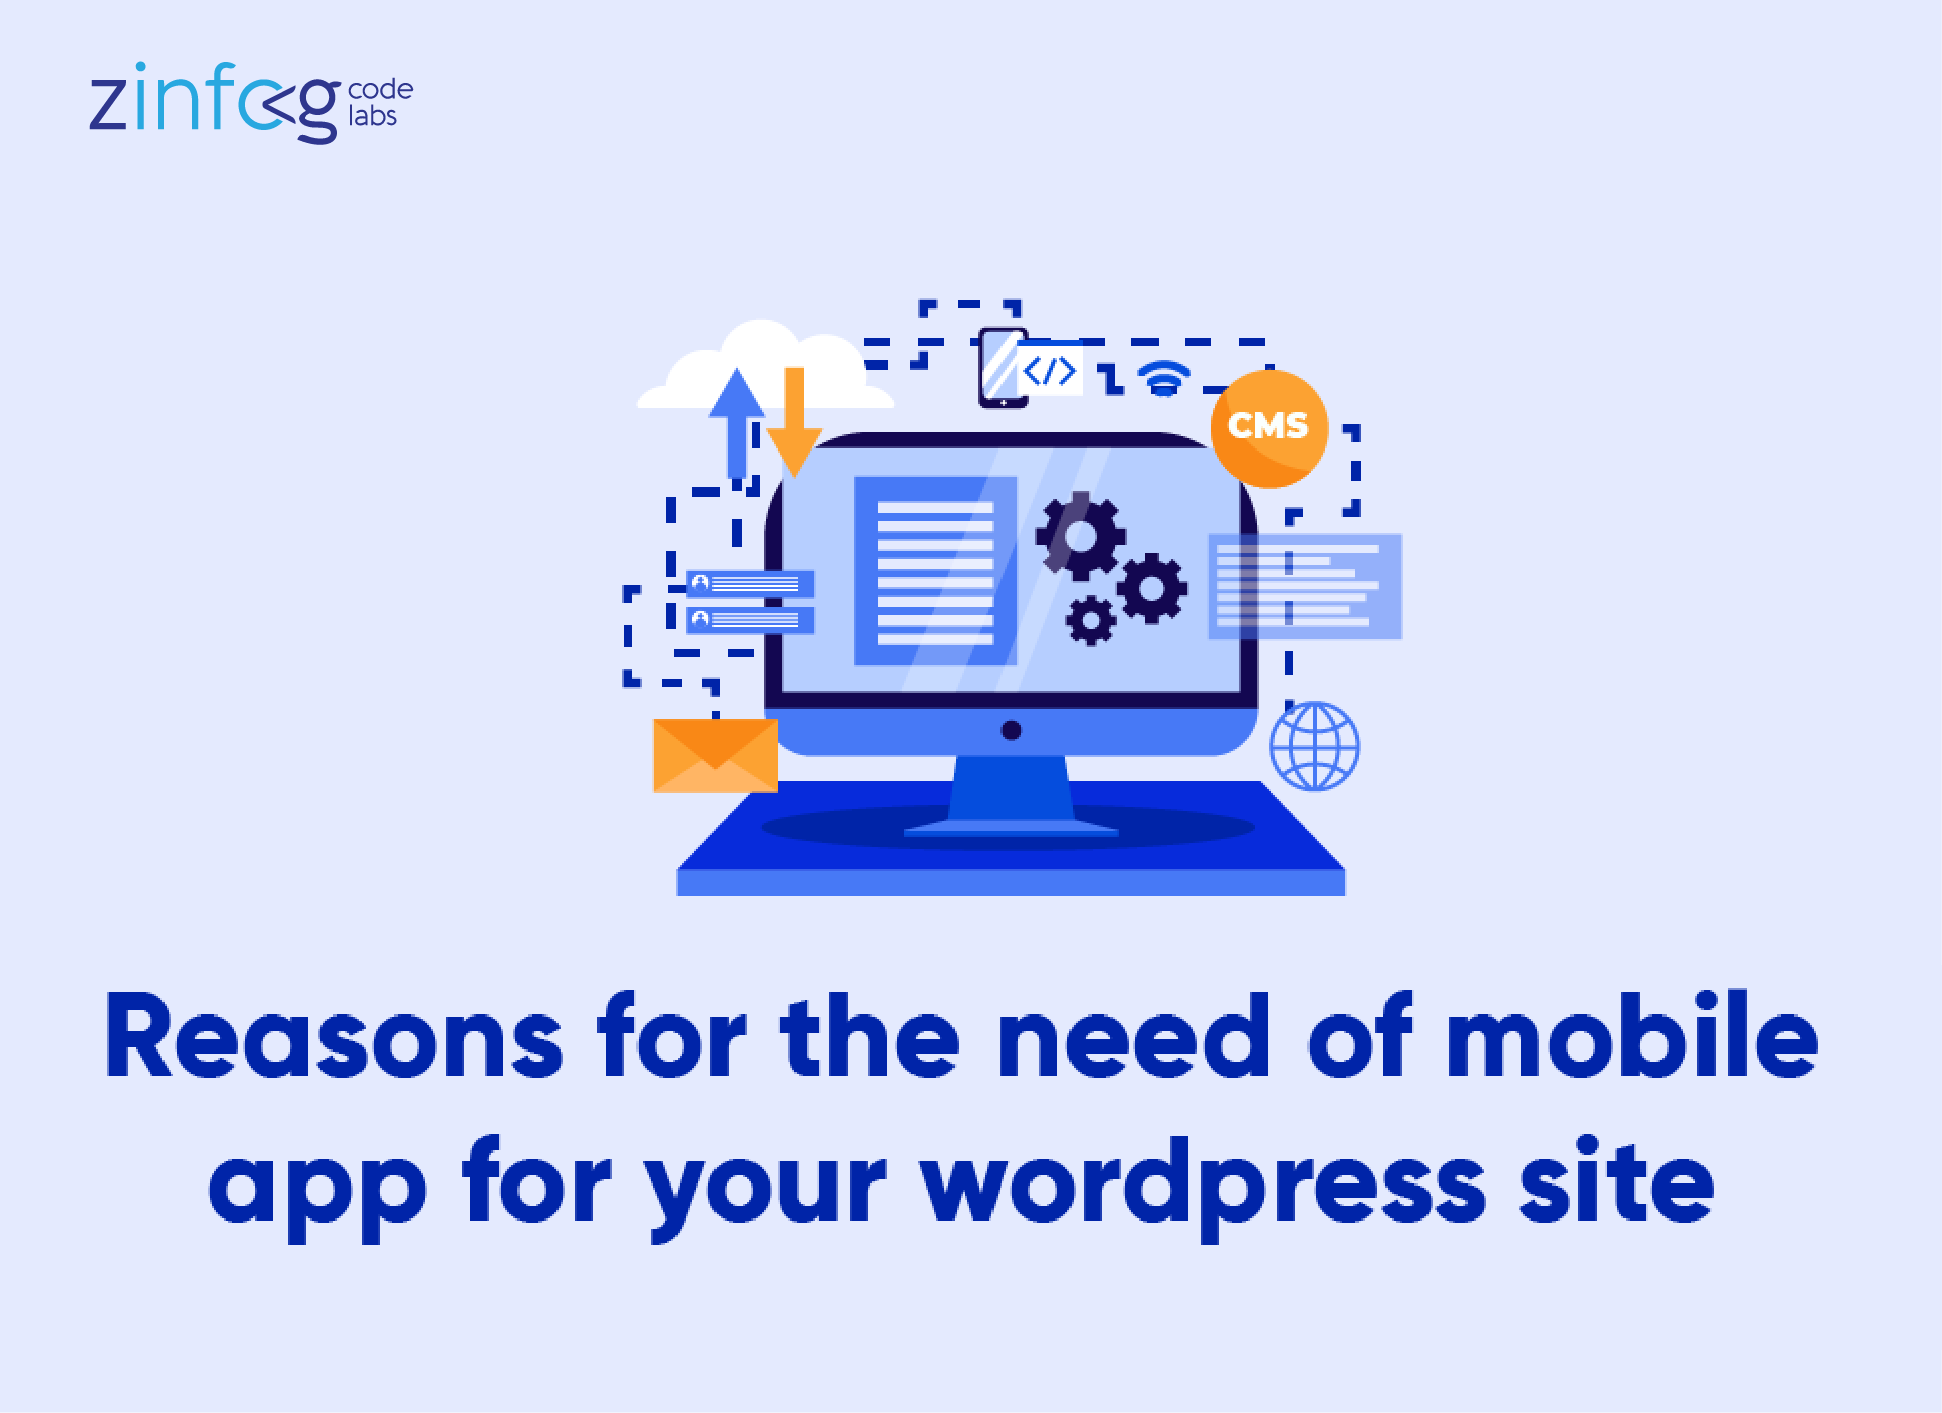 reasons-for-the-need-of-mobile-app-for-your-wordpress-site.html